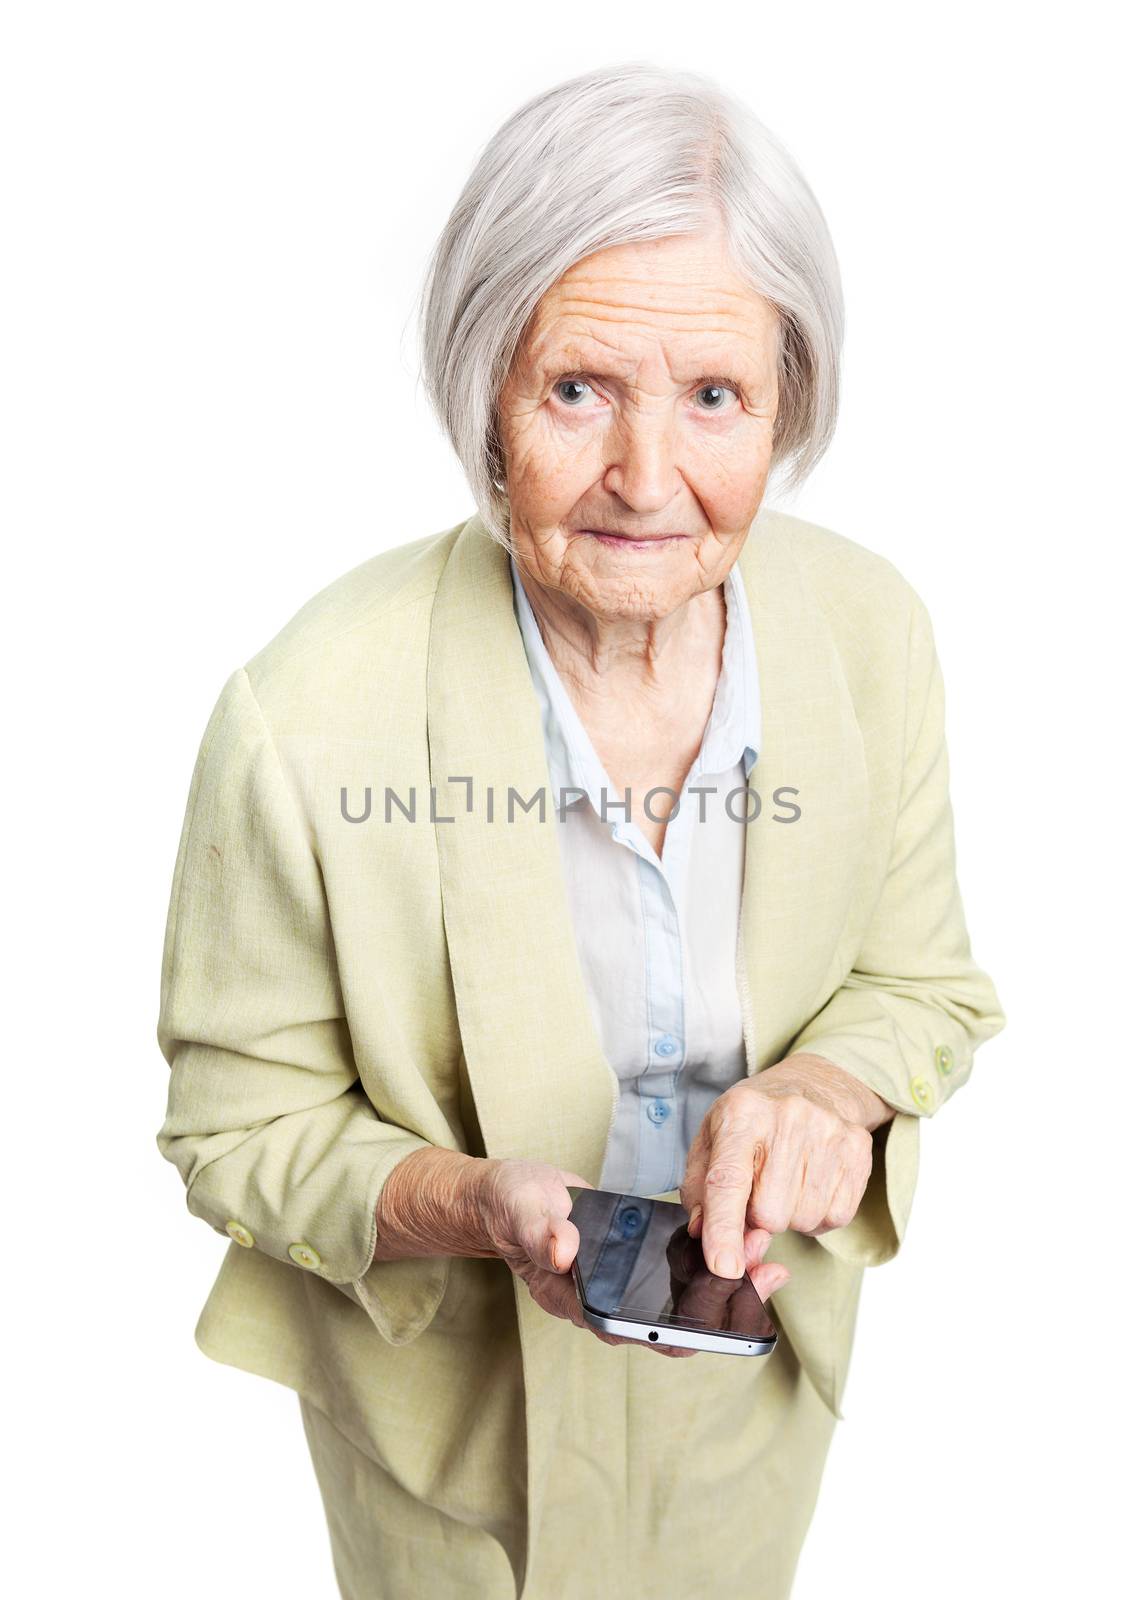 Senior woman holding mobile phone and looking at camera over white